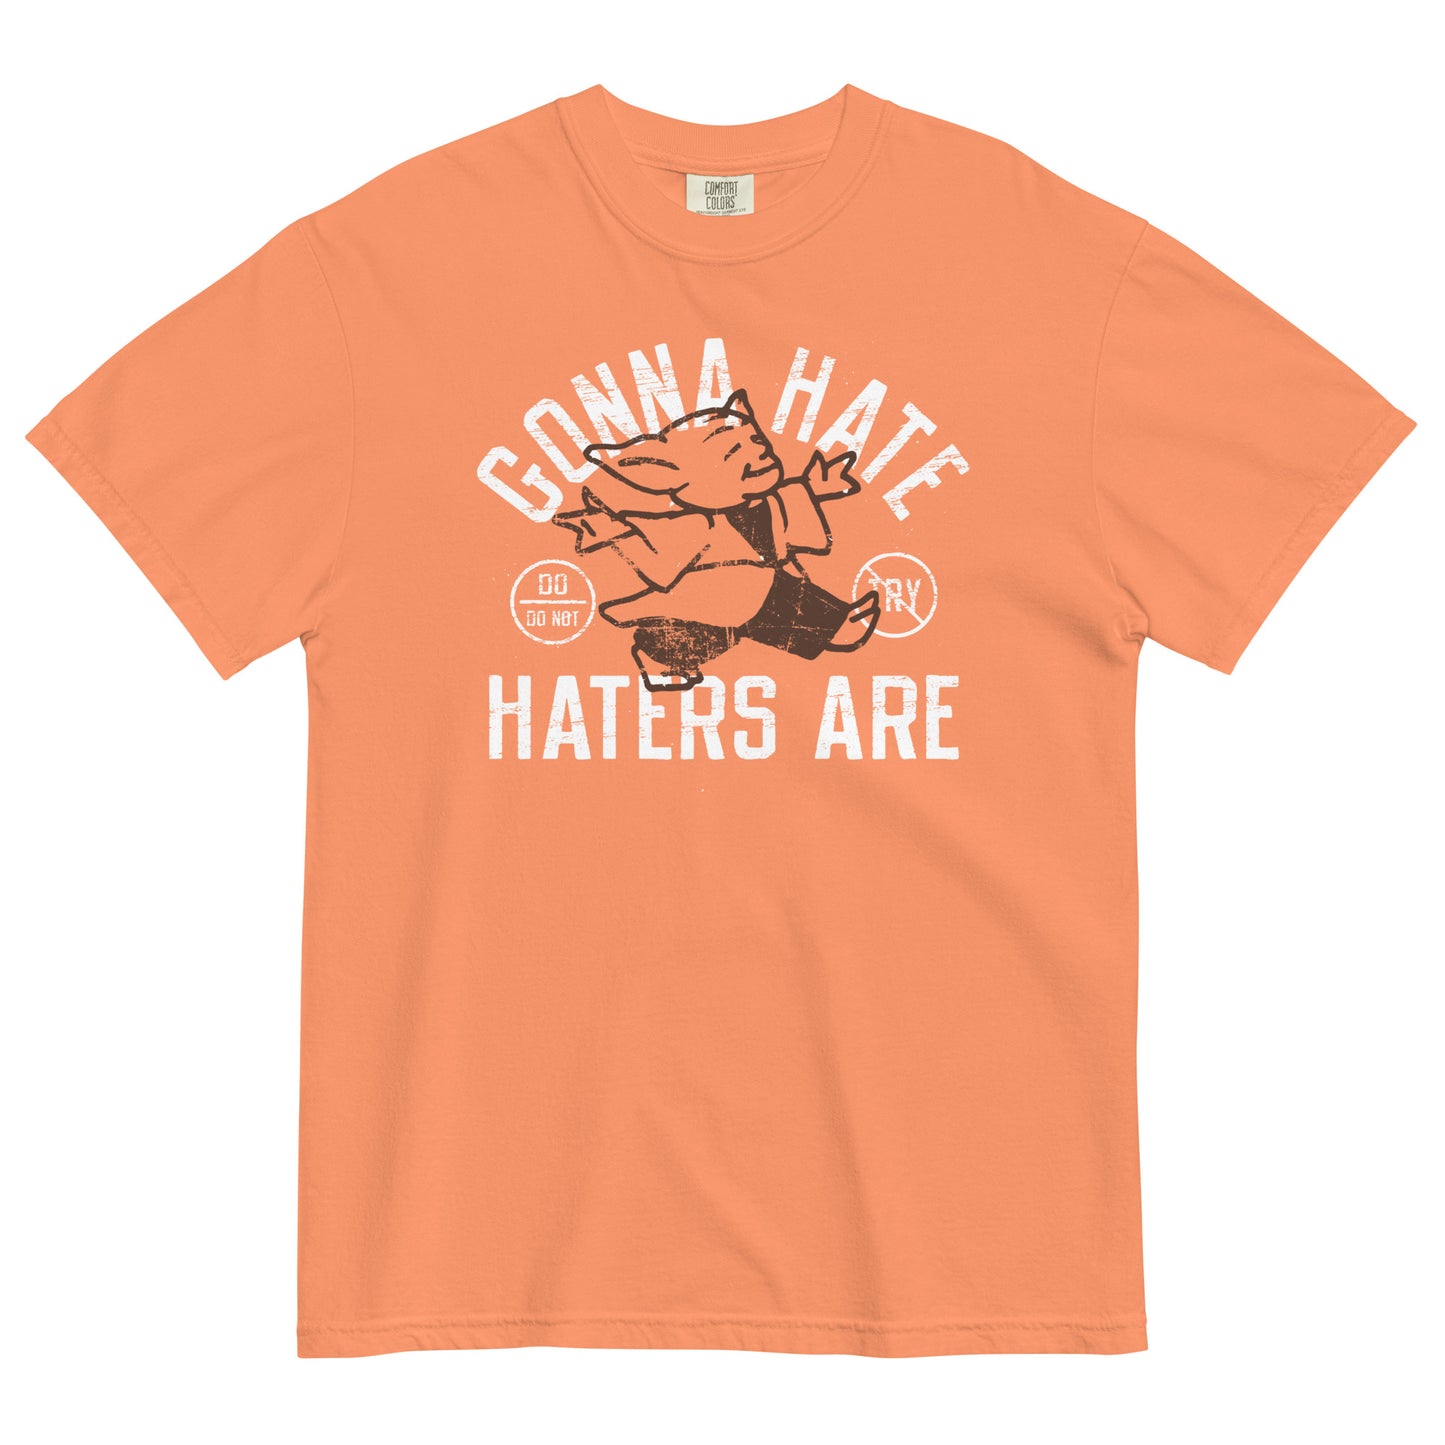 Gonna Hate Haters Are Men's Relaxed Fit Tee